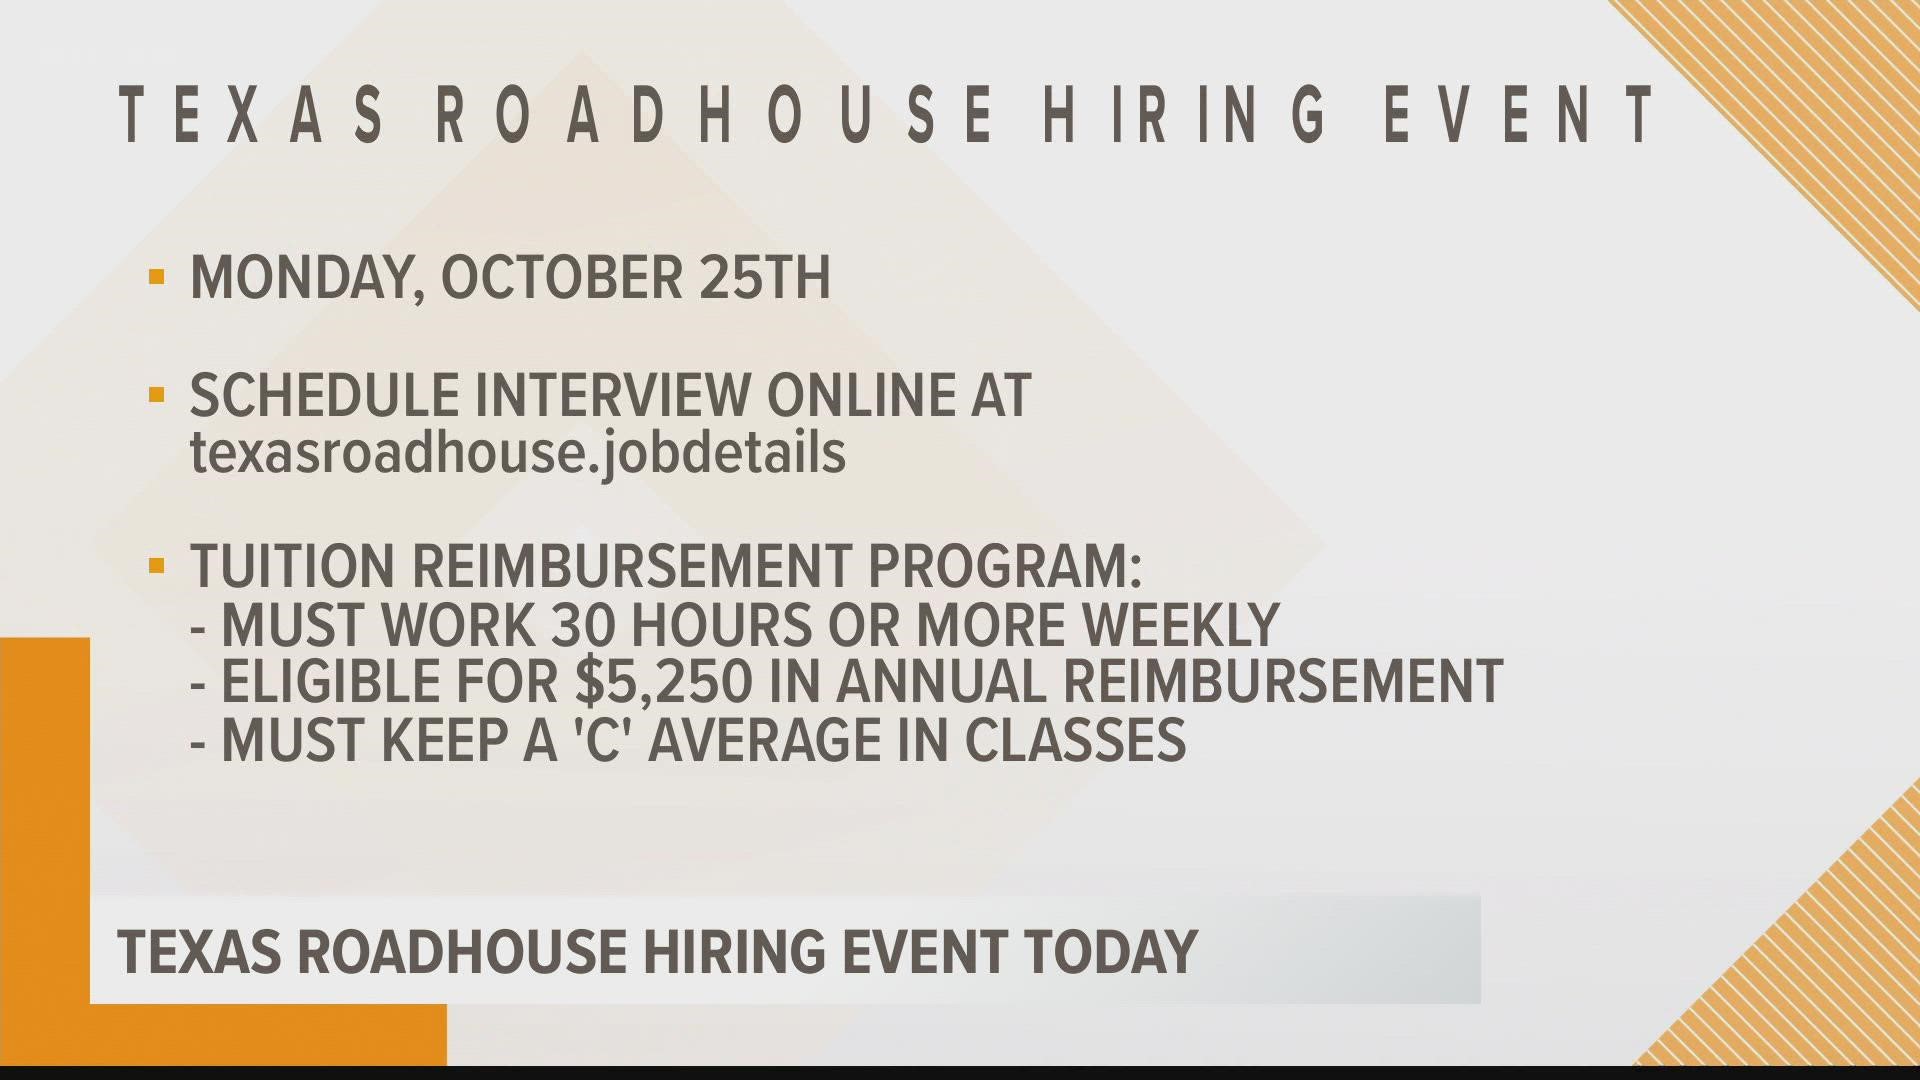 Columbia Texas Roadhouse locations will host a hiring event on October 25 to fill both full and part-time positions.